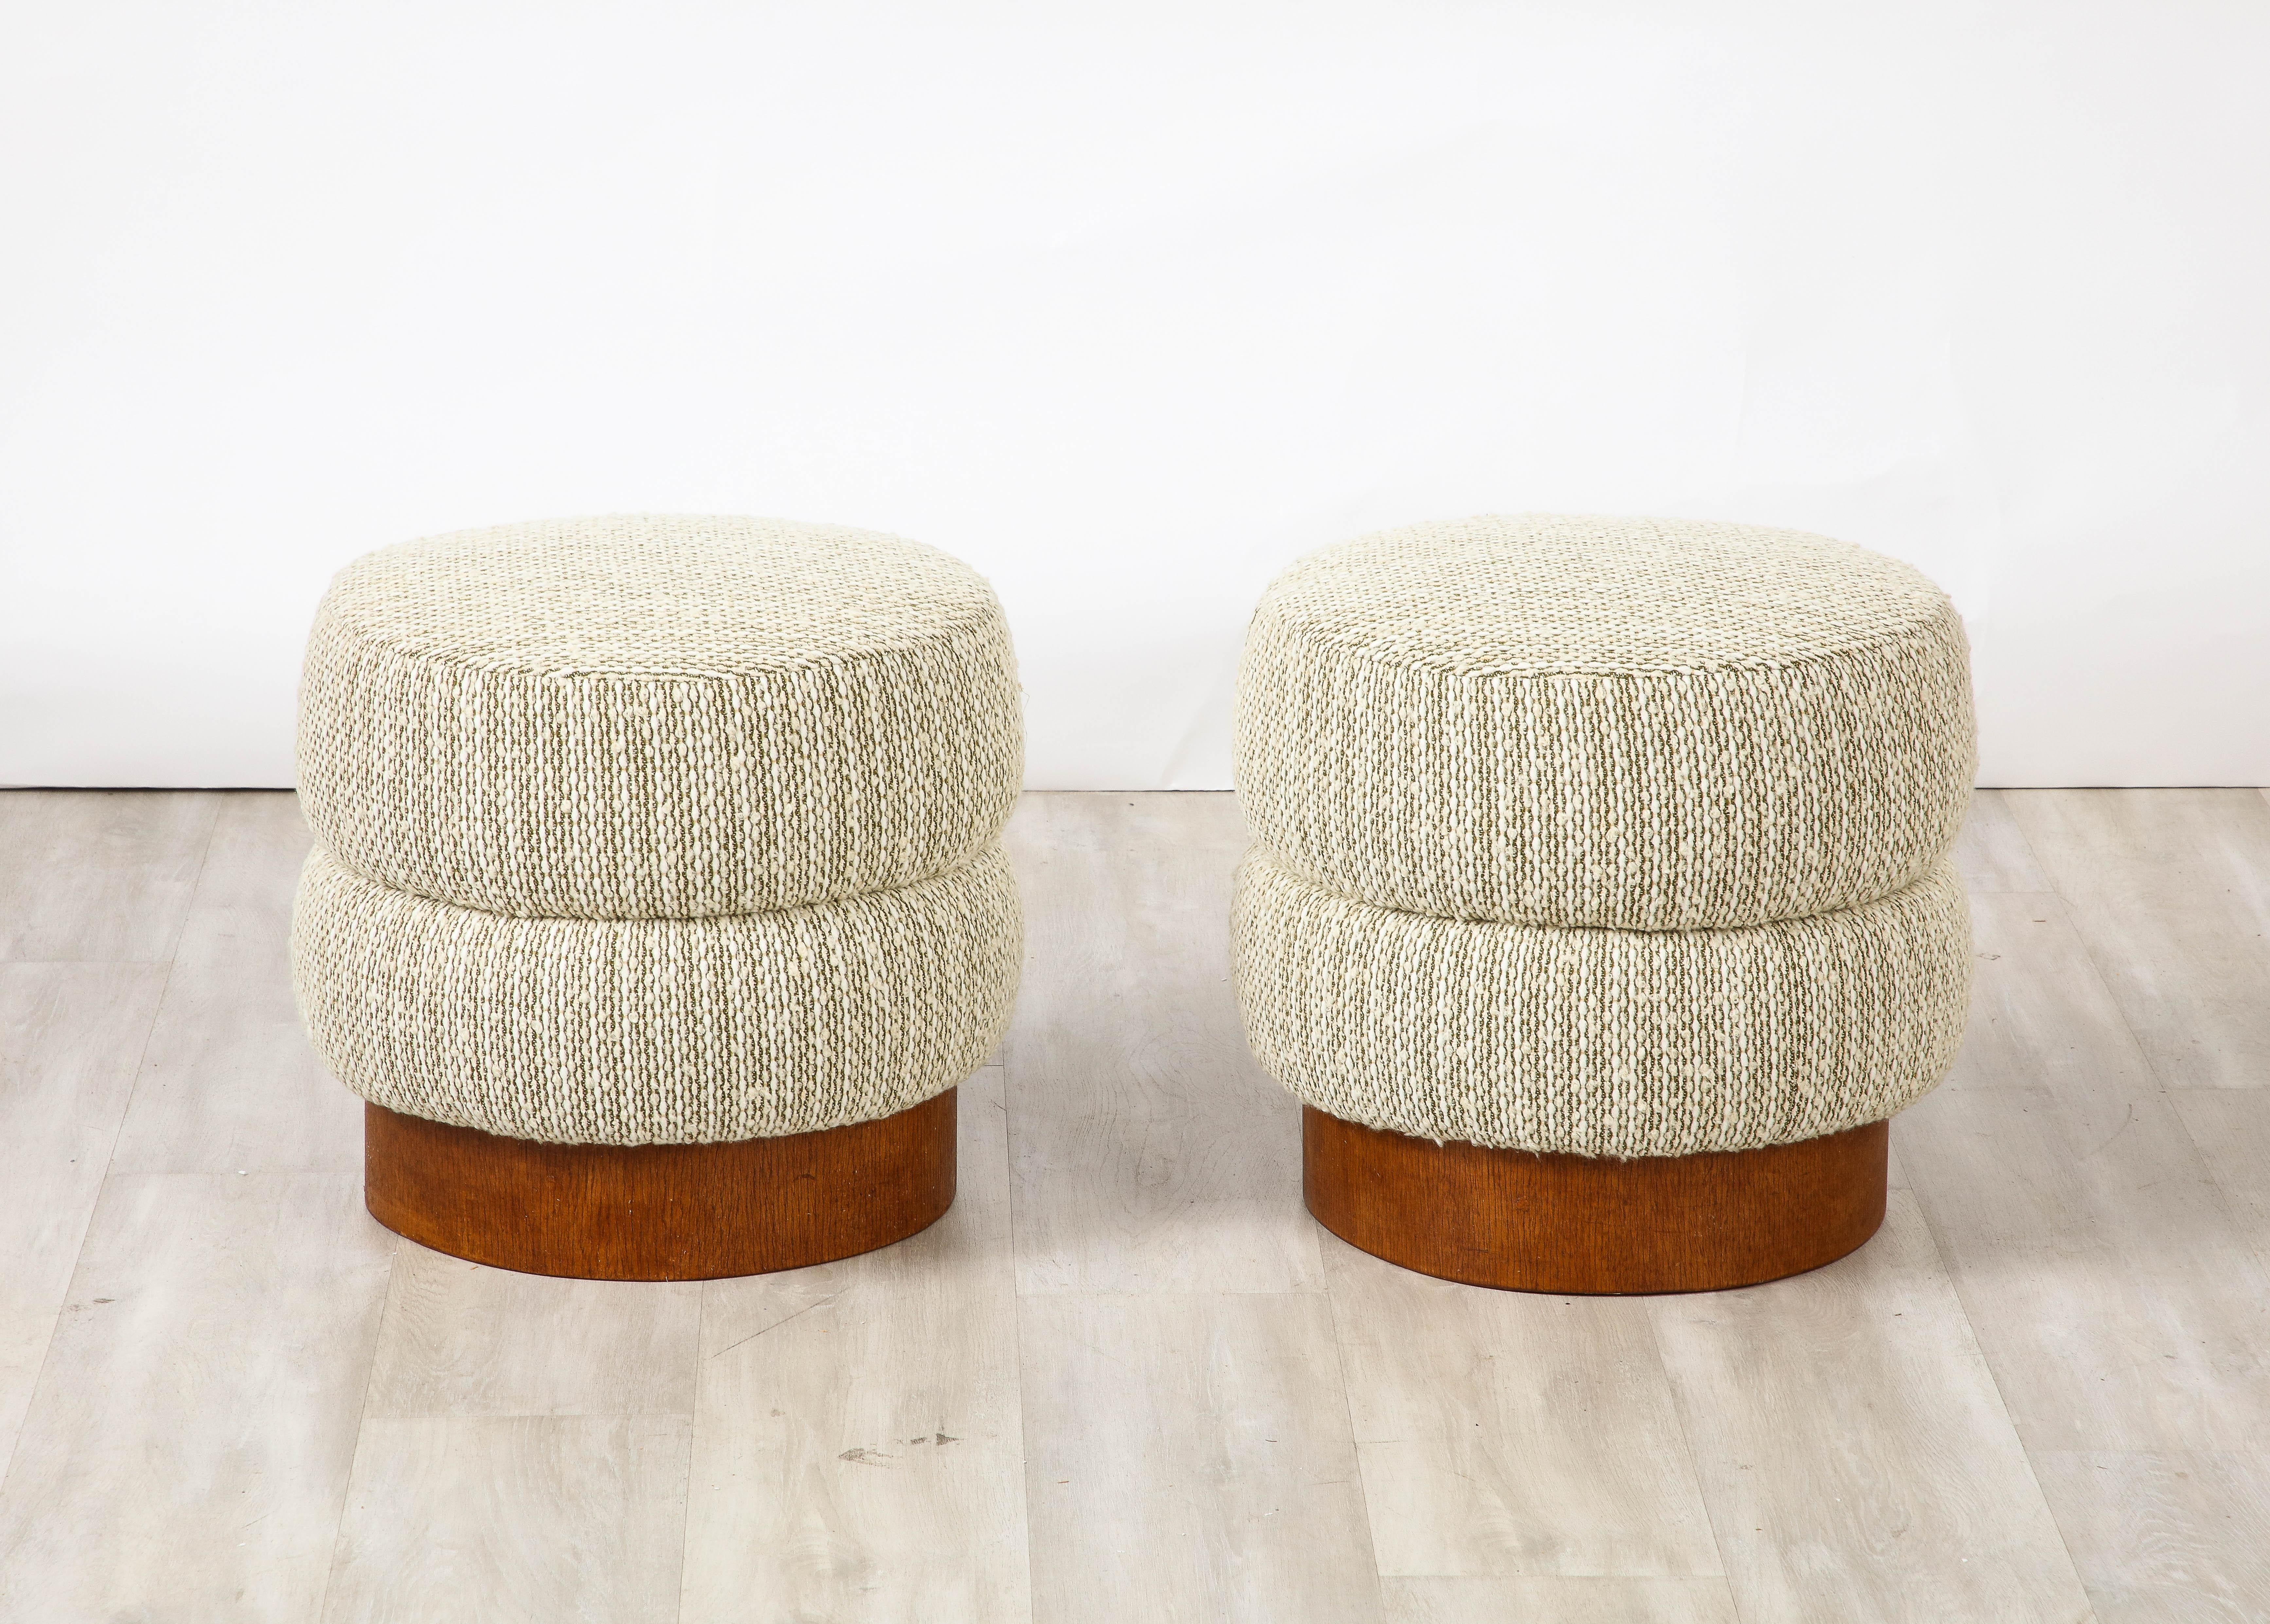 A pair of Italian Art Deco circular stools with walnut surround bases and upholstered channel seats.  Newly upholstered.
Italy, circa 1940 
Size: 15 3/4